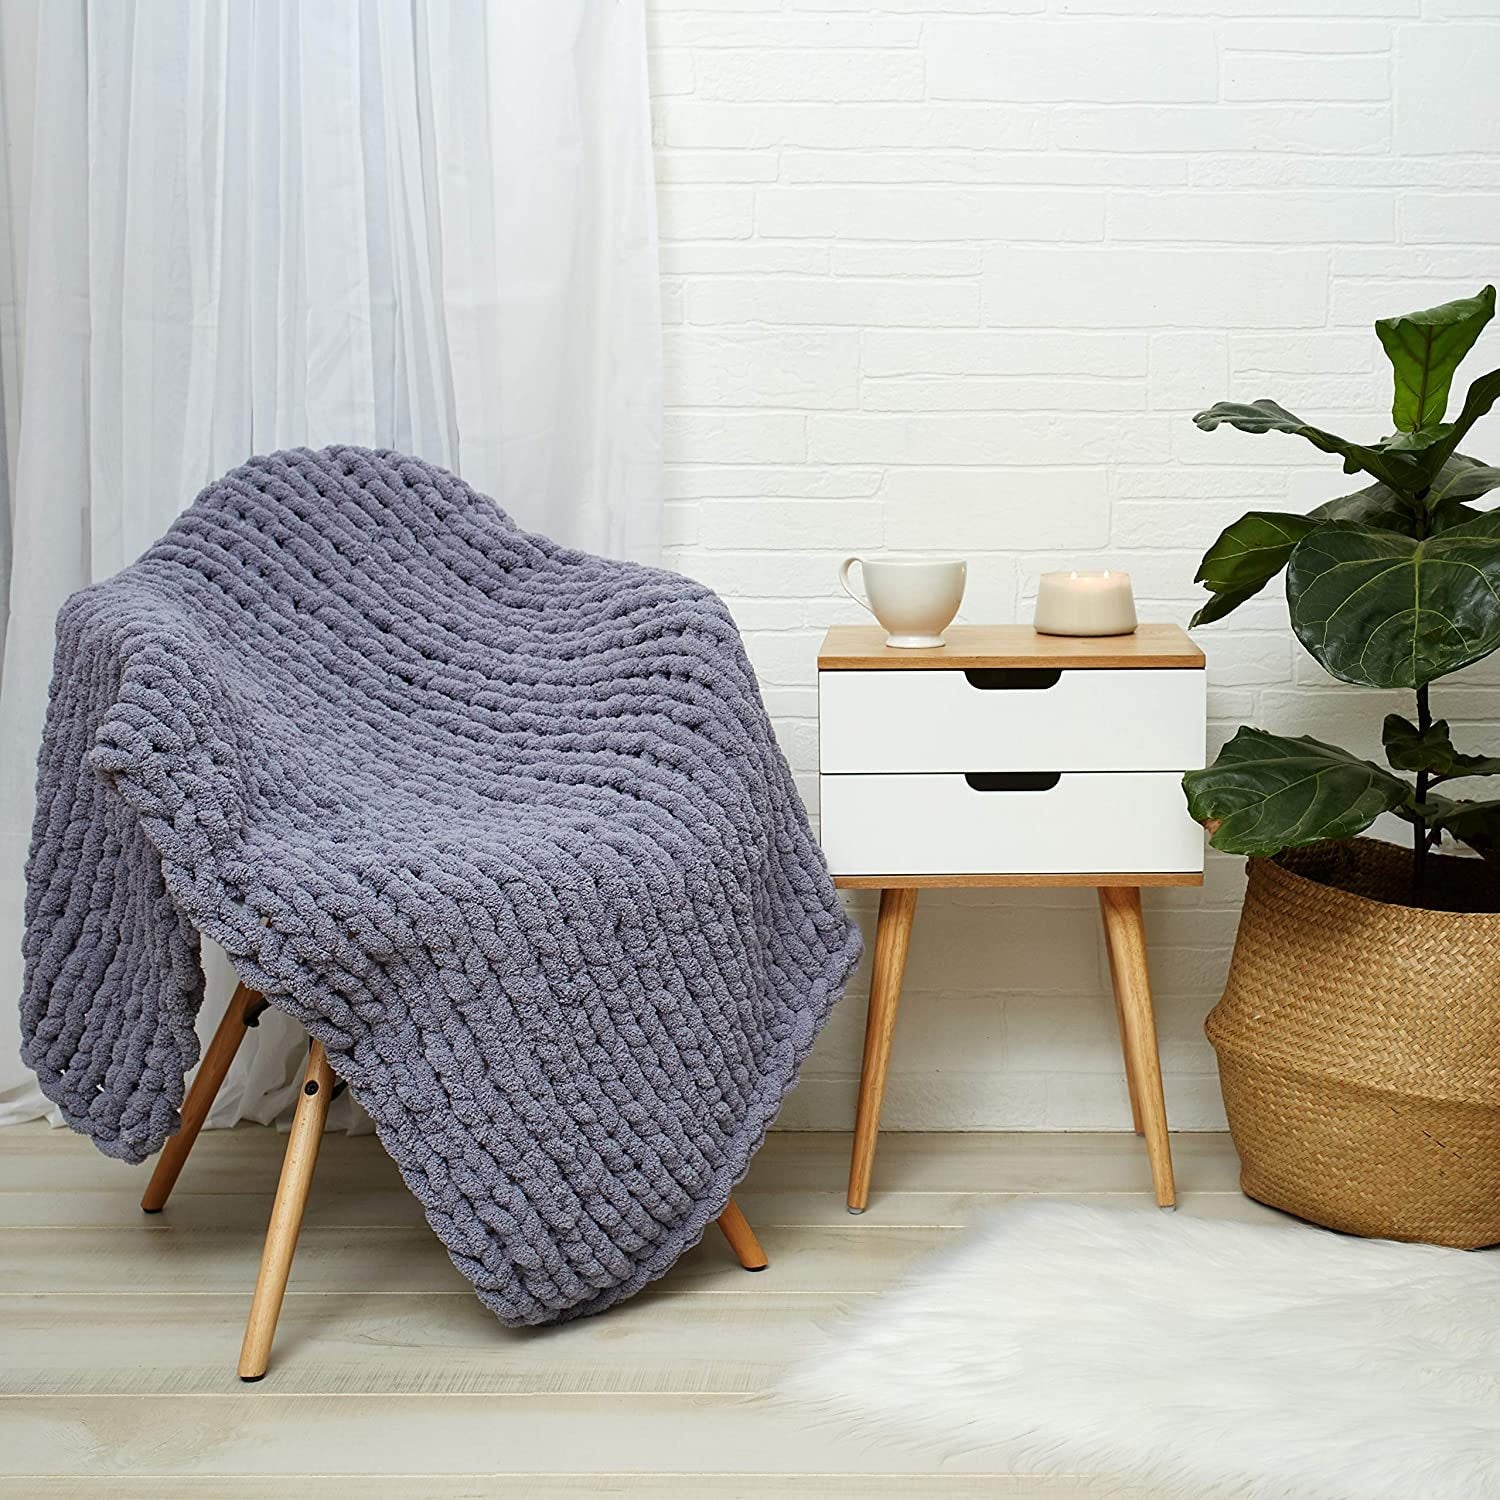 Chunky knitted woollen throw / blanket